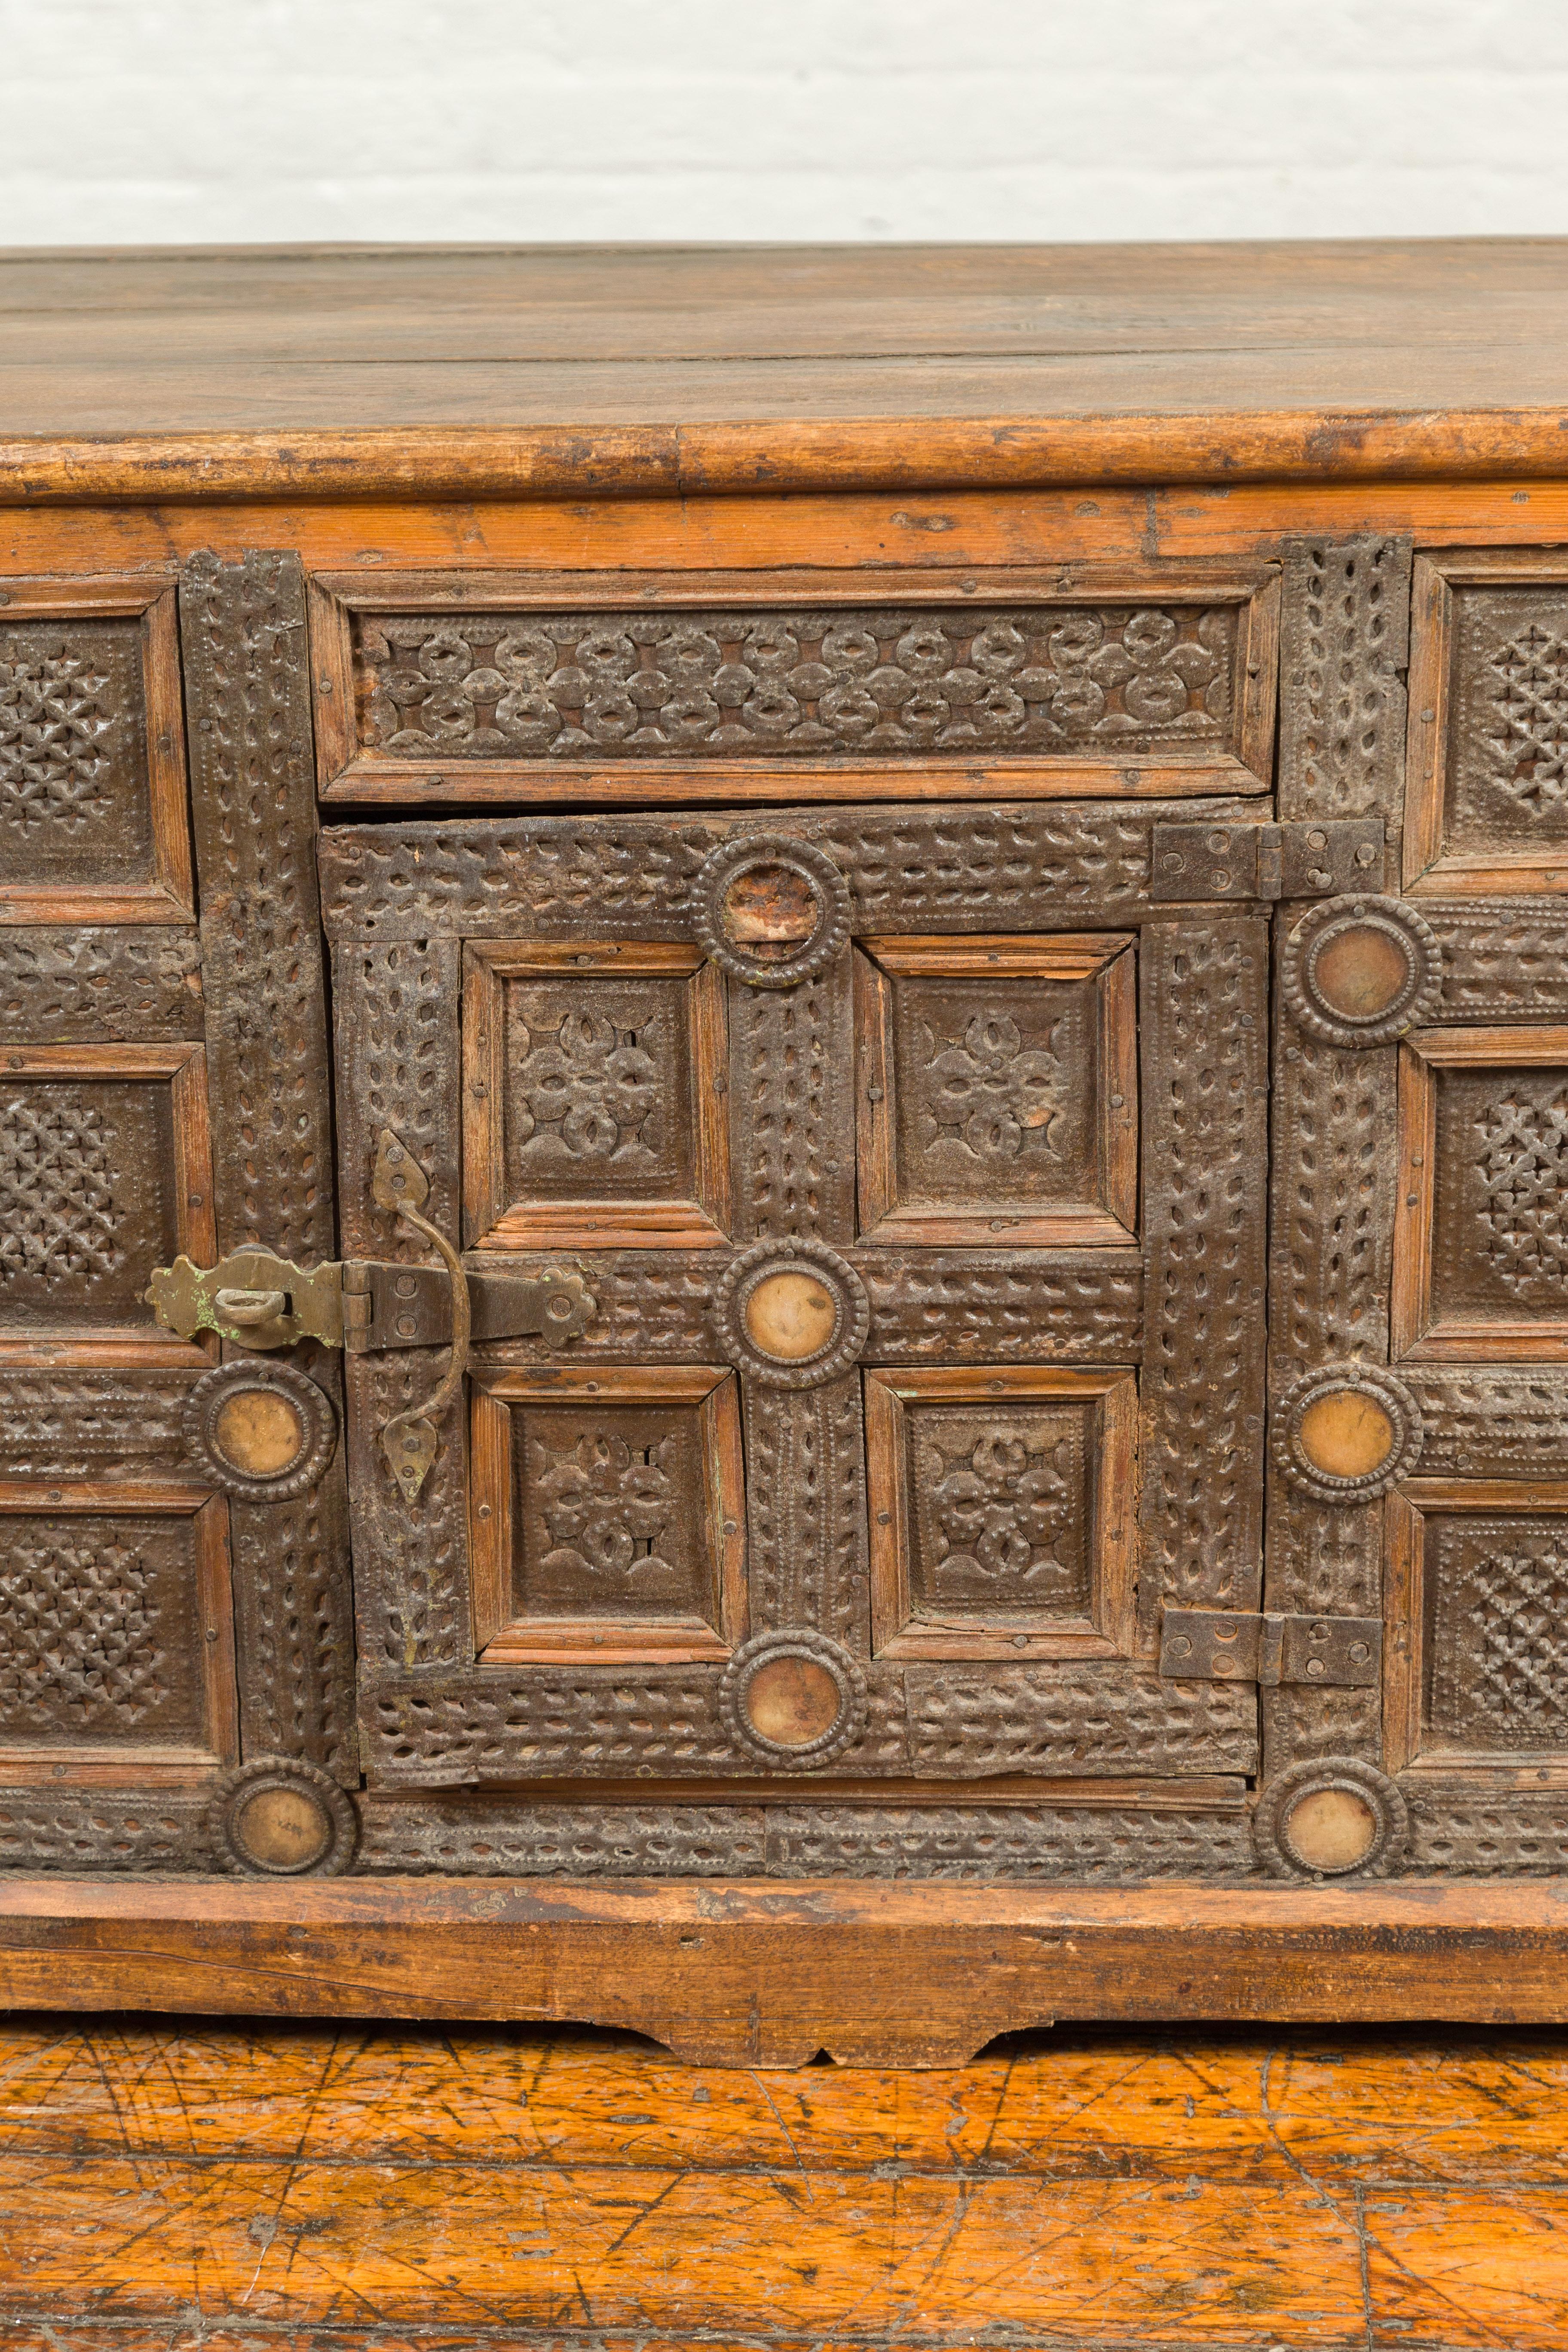 Indian Vintage Wood and Metal Cabinet with Geometric Decor 2